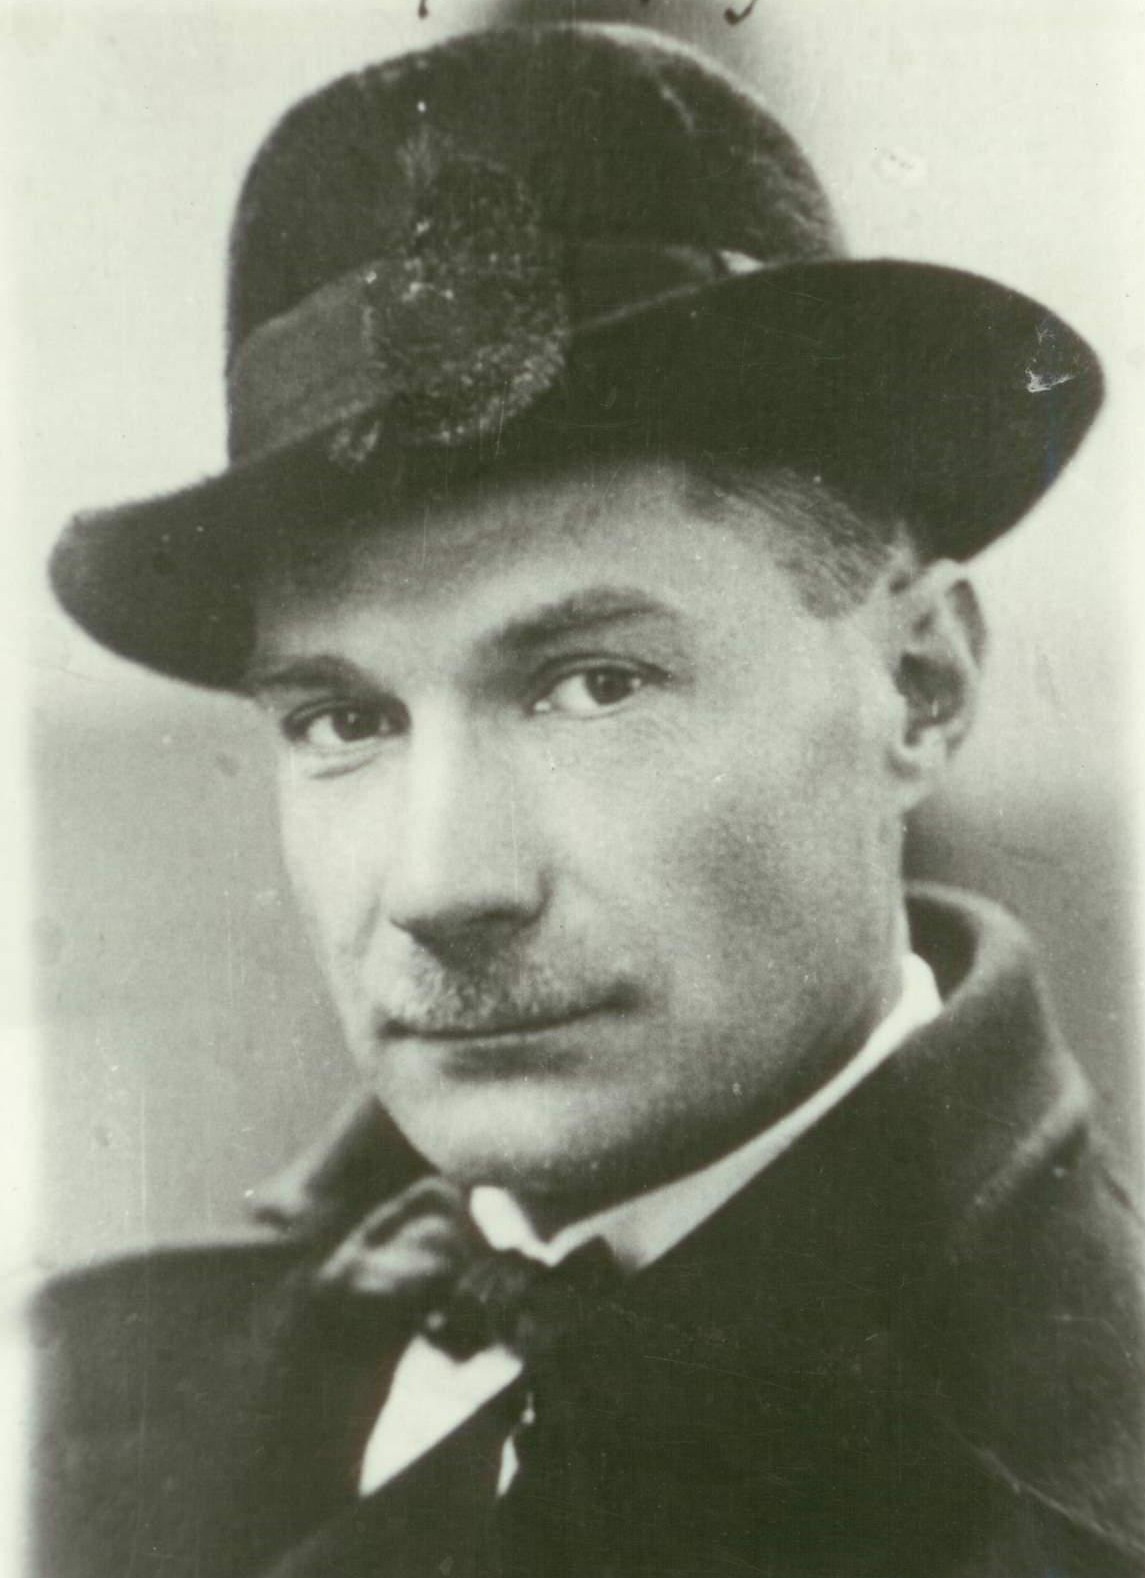 Name: Yevgeny Zamyatin Nationality: Russian Born/Died: 1884-1937. Famous for: We (1927) Islanders (1917) A Fisher of Men (1917) as well as many short ... - Yevgeny-Zamyatin